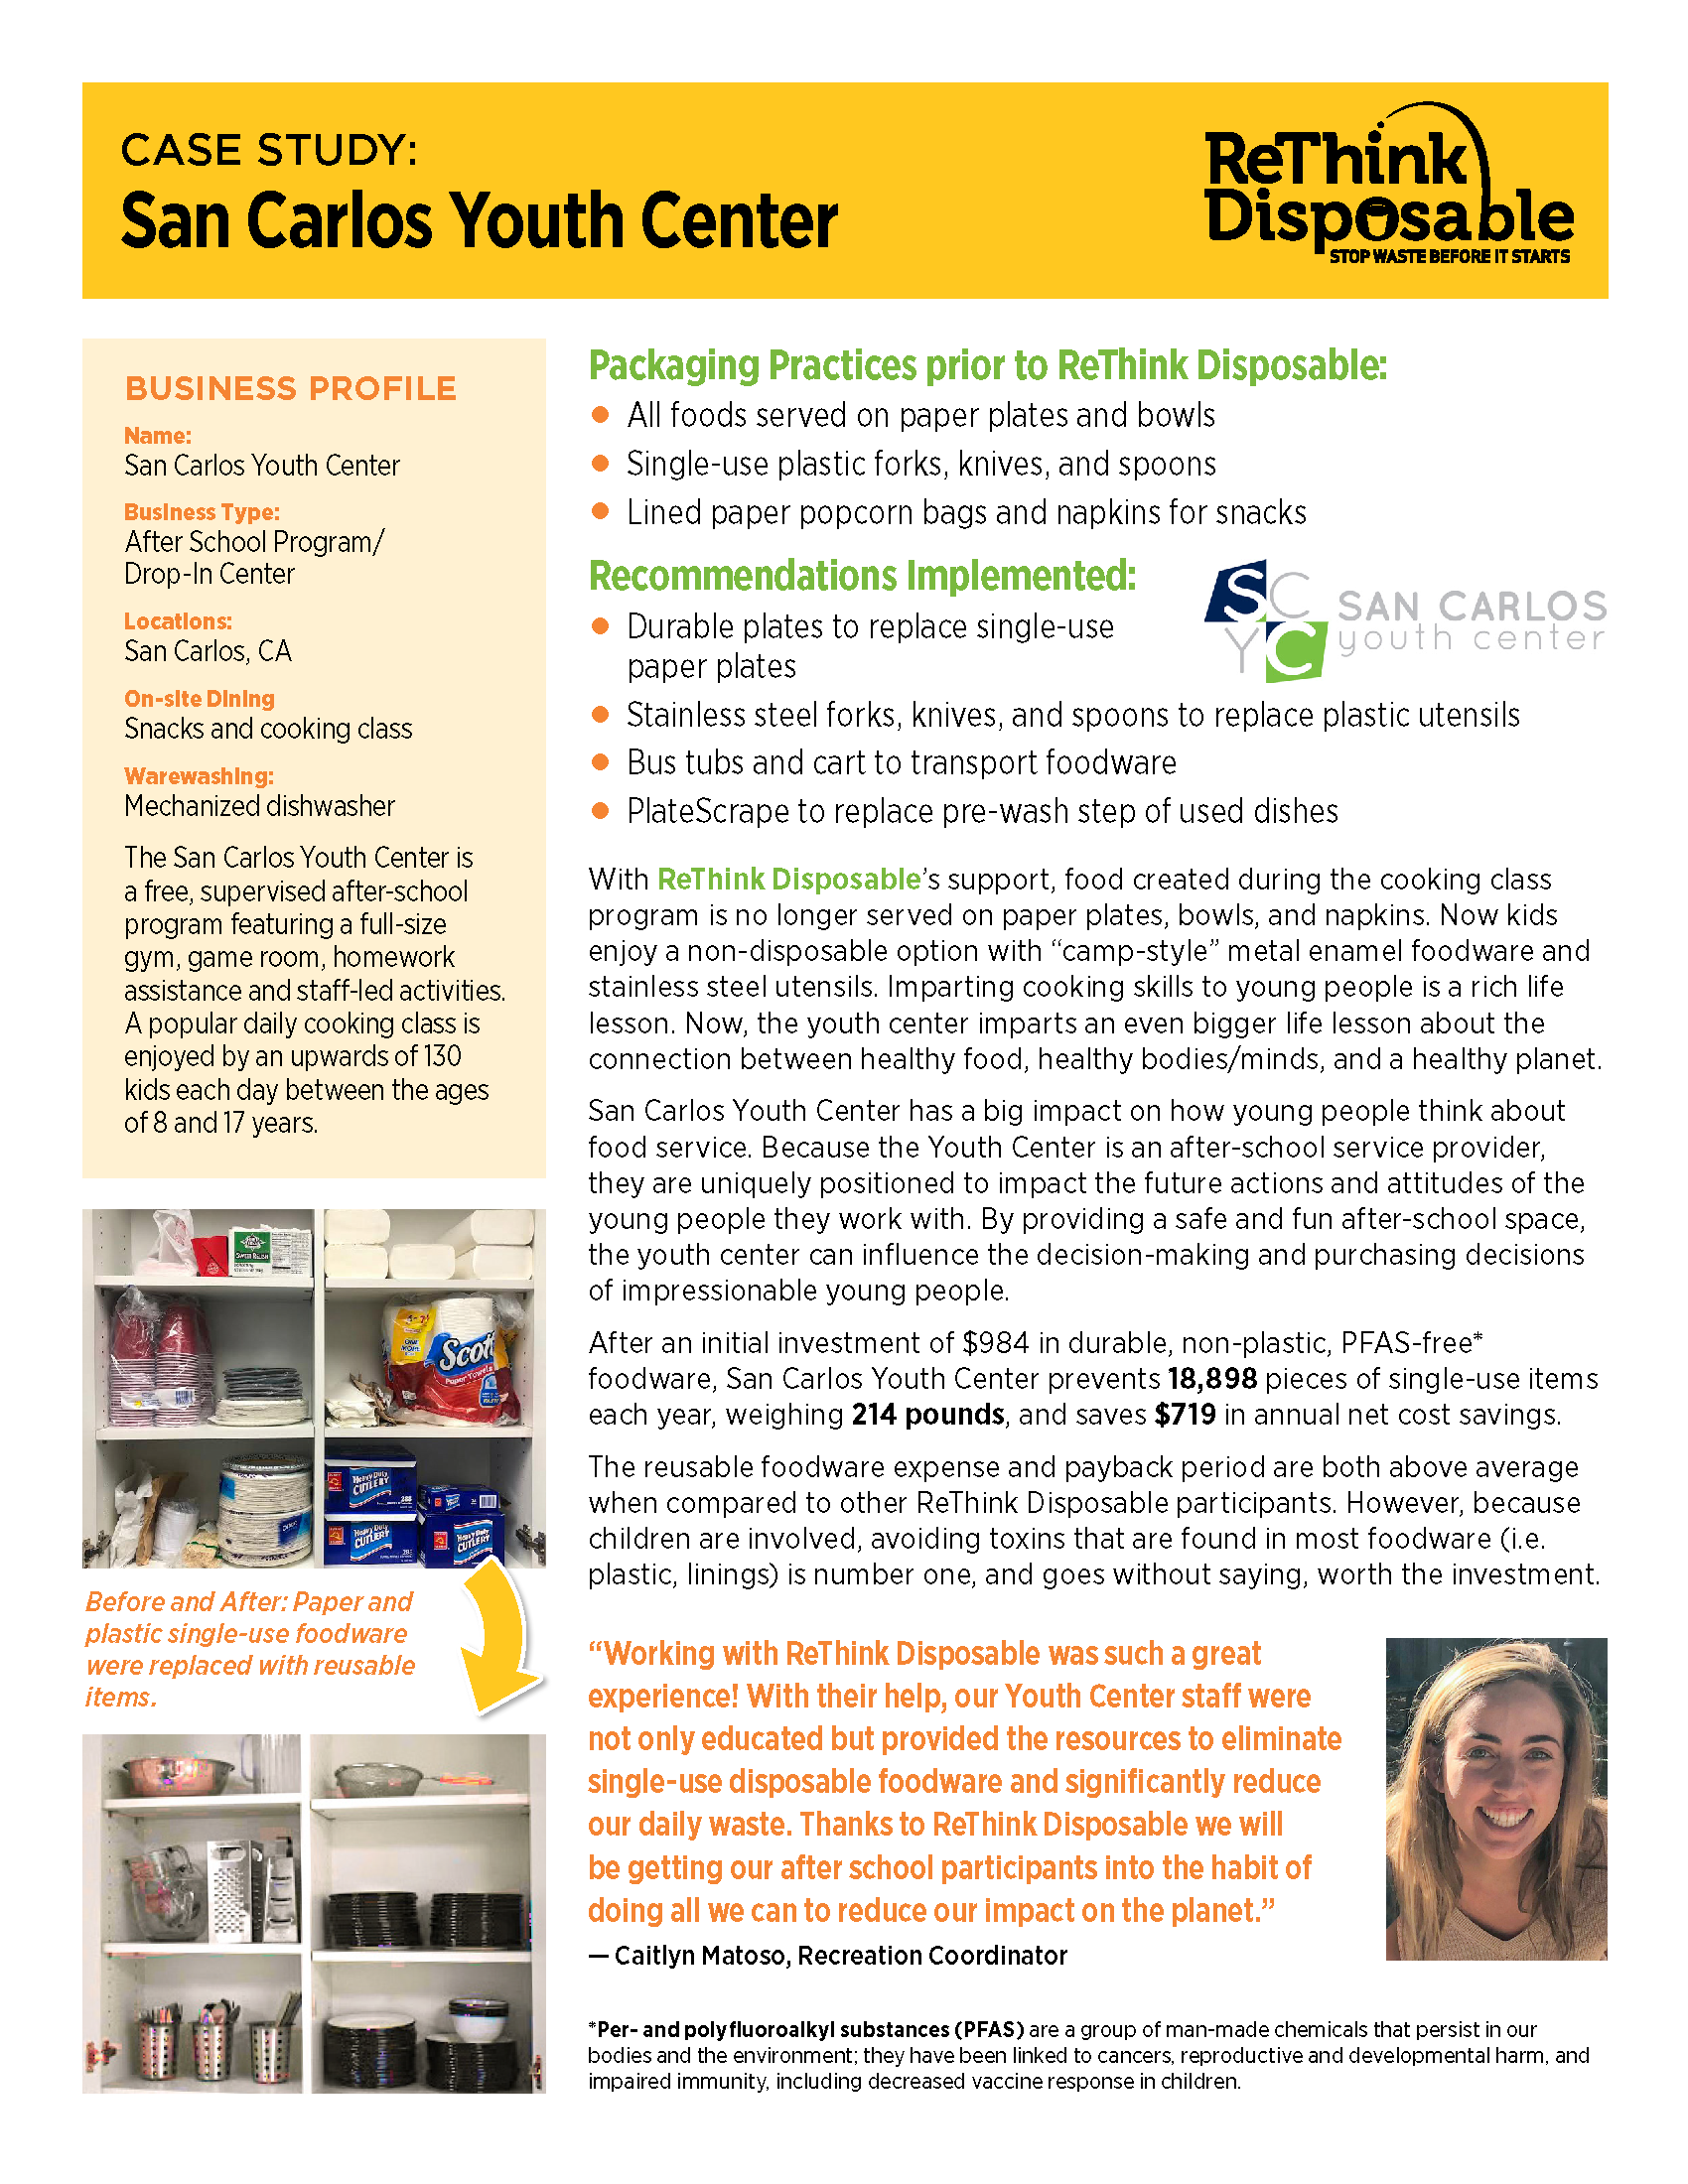 ReThink Disposable Case Study | San Carlos Youth Center, Page 1